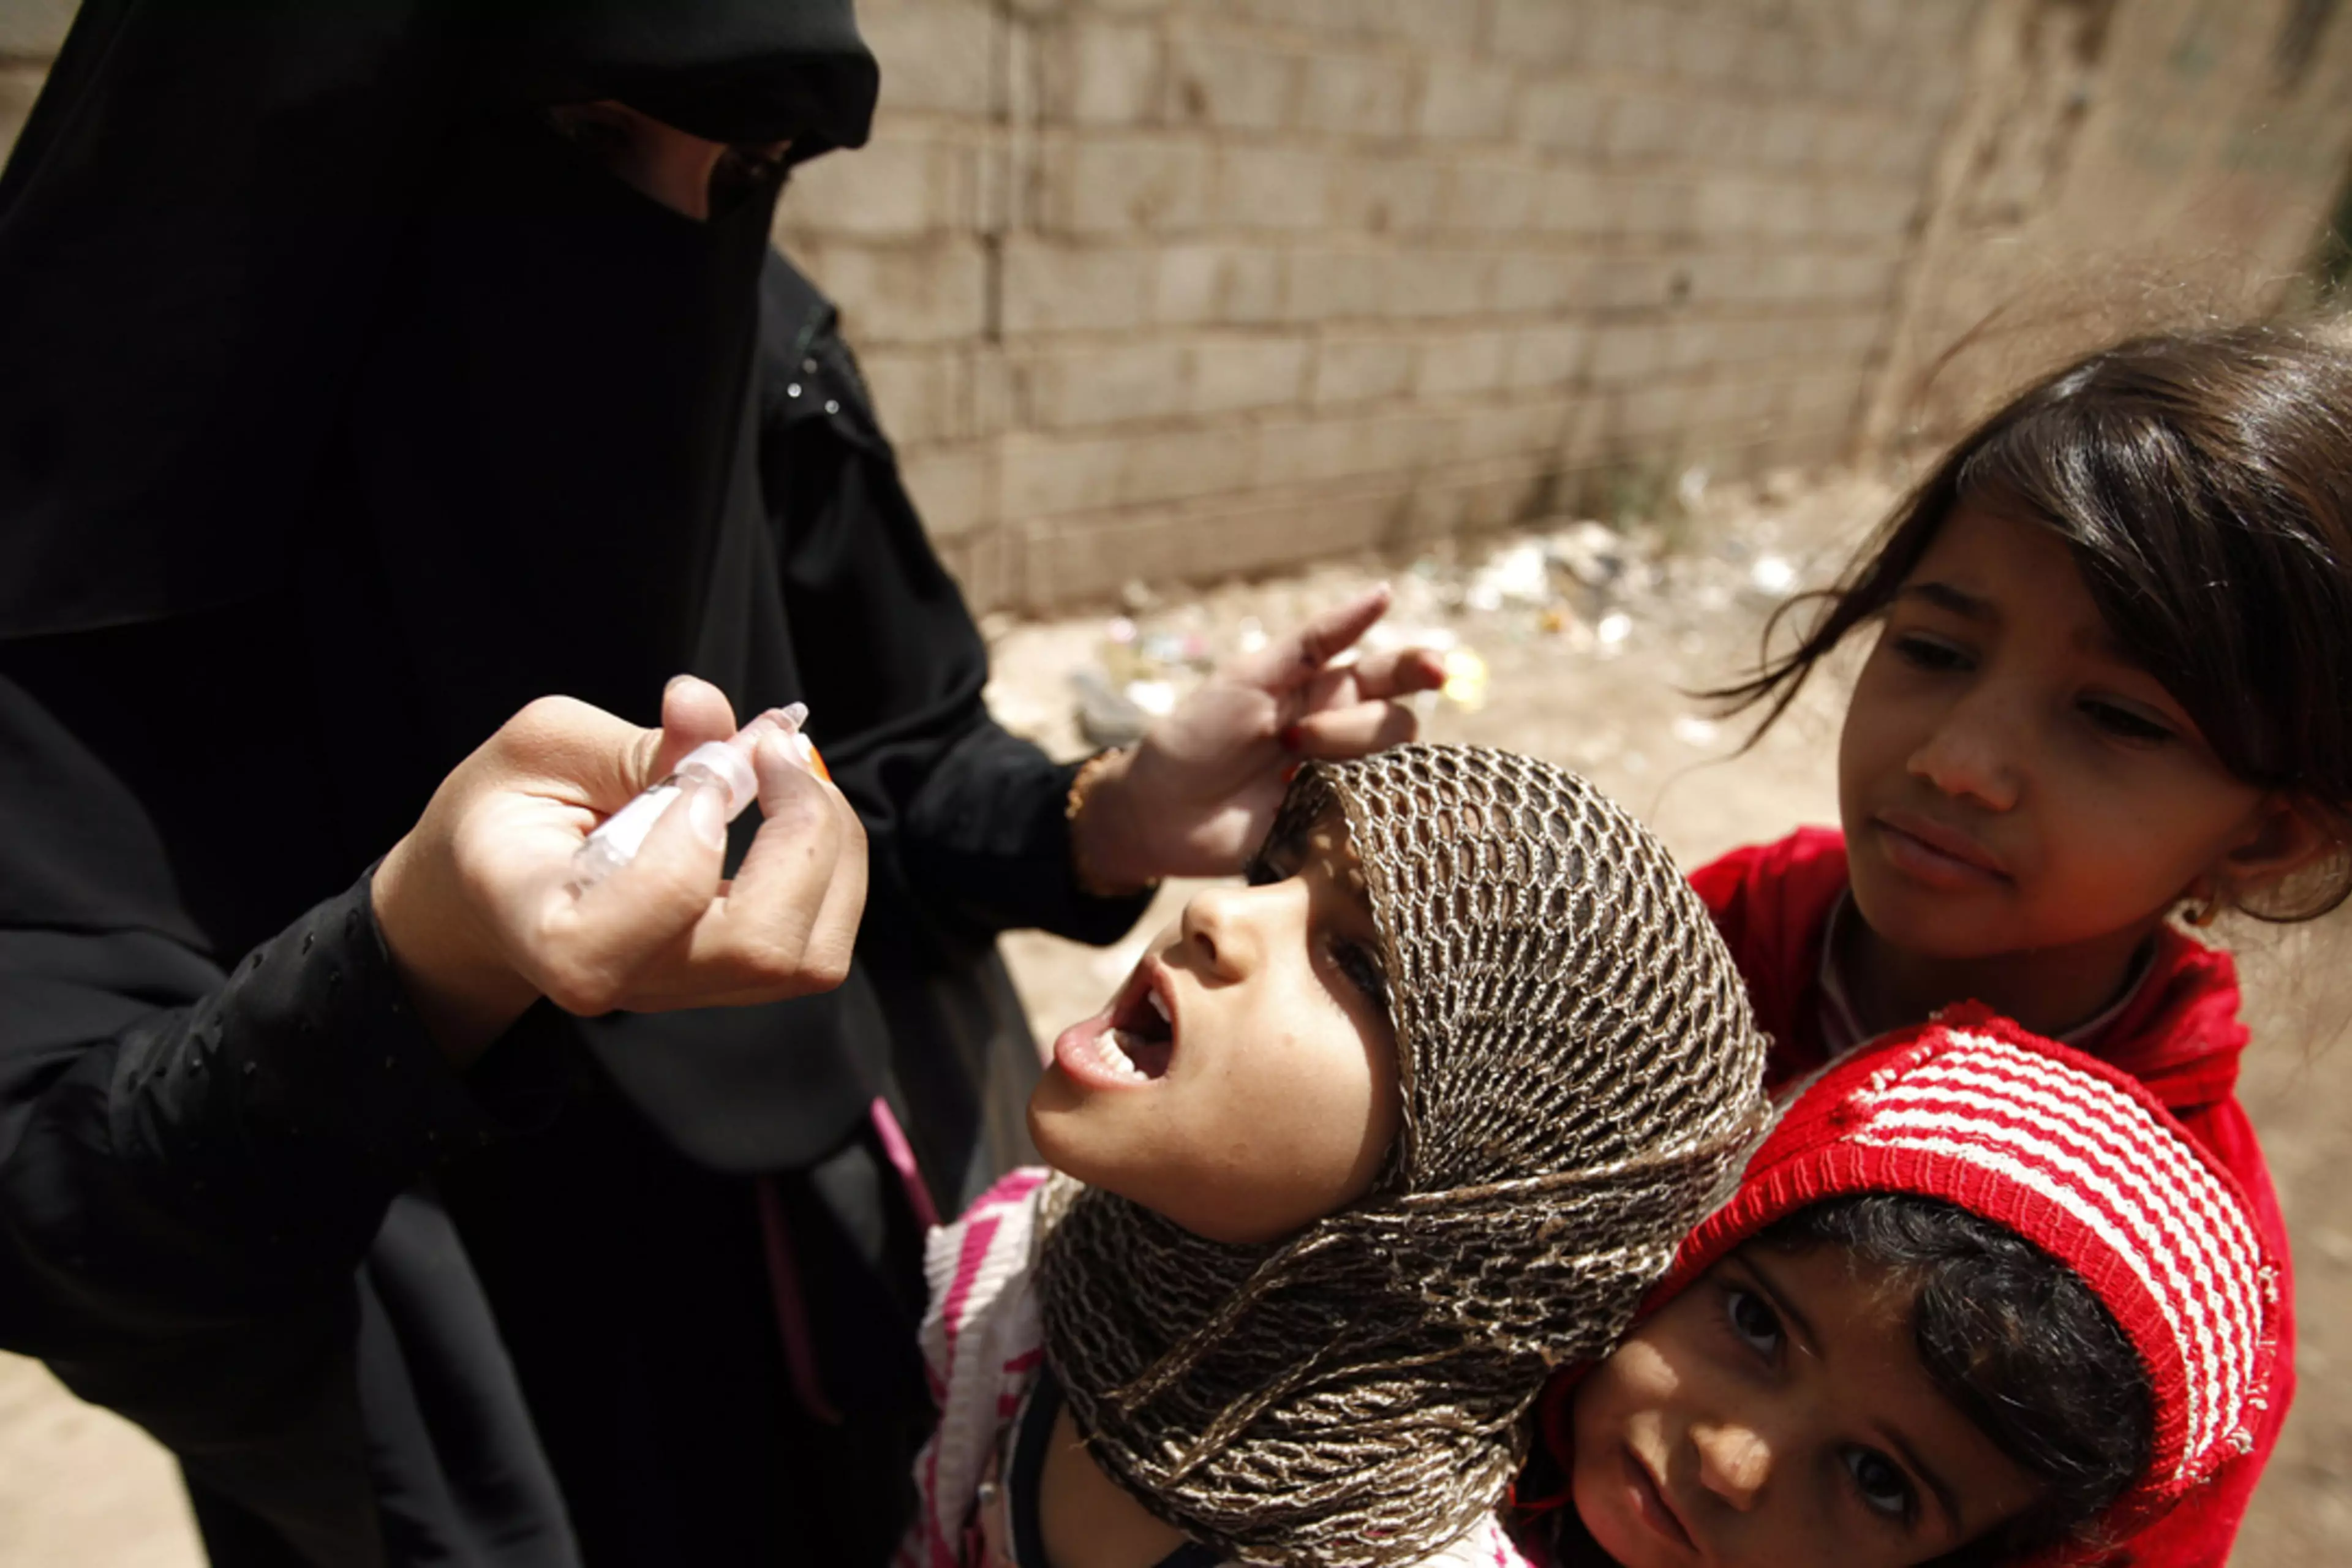 A health worker administers drops of polio vaccine to children in an outskirt of the Yemeni capital Sana'a.